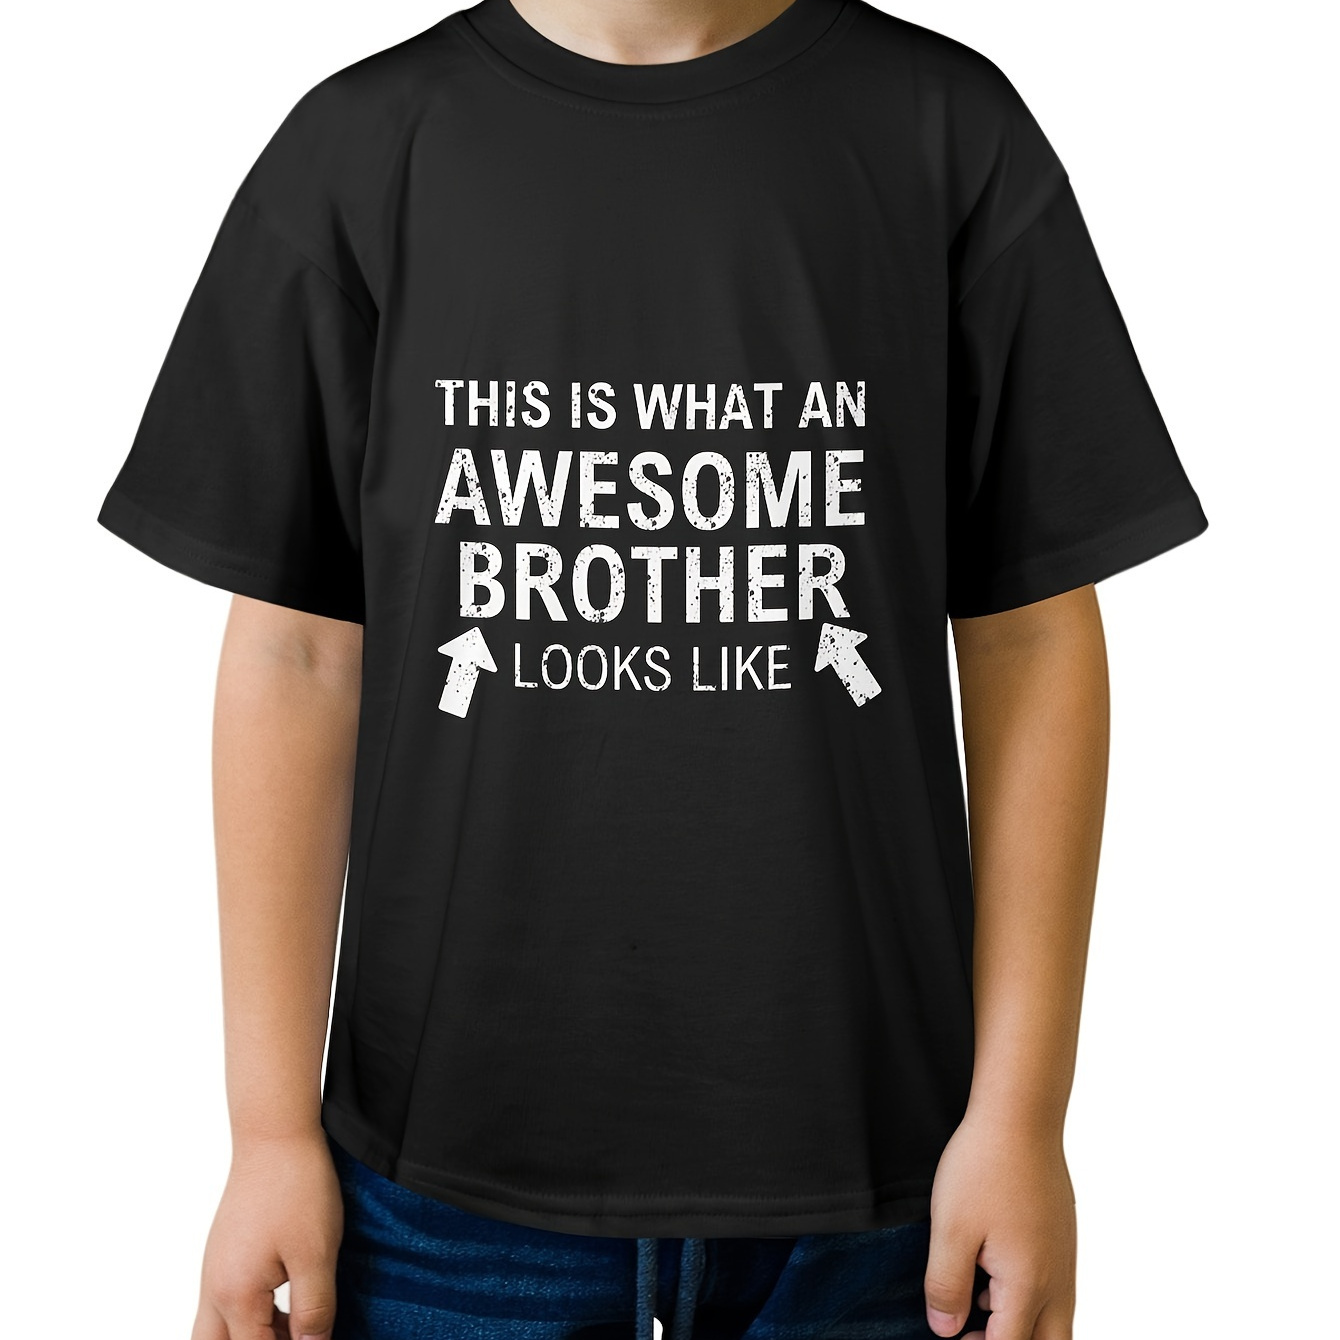 

This Is What An Awesome Brother Letter Print Boys Casual Short Sleeve T-shirts - Comfortable & Stylish Tops For Summer - Ideal Gift For Your Fashionistas